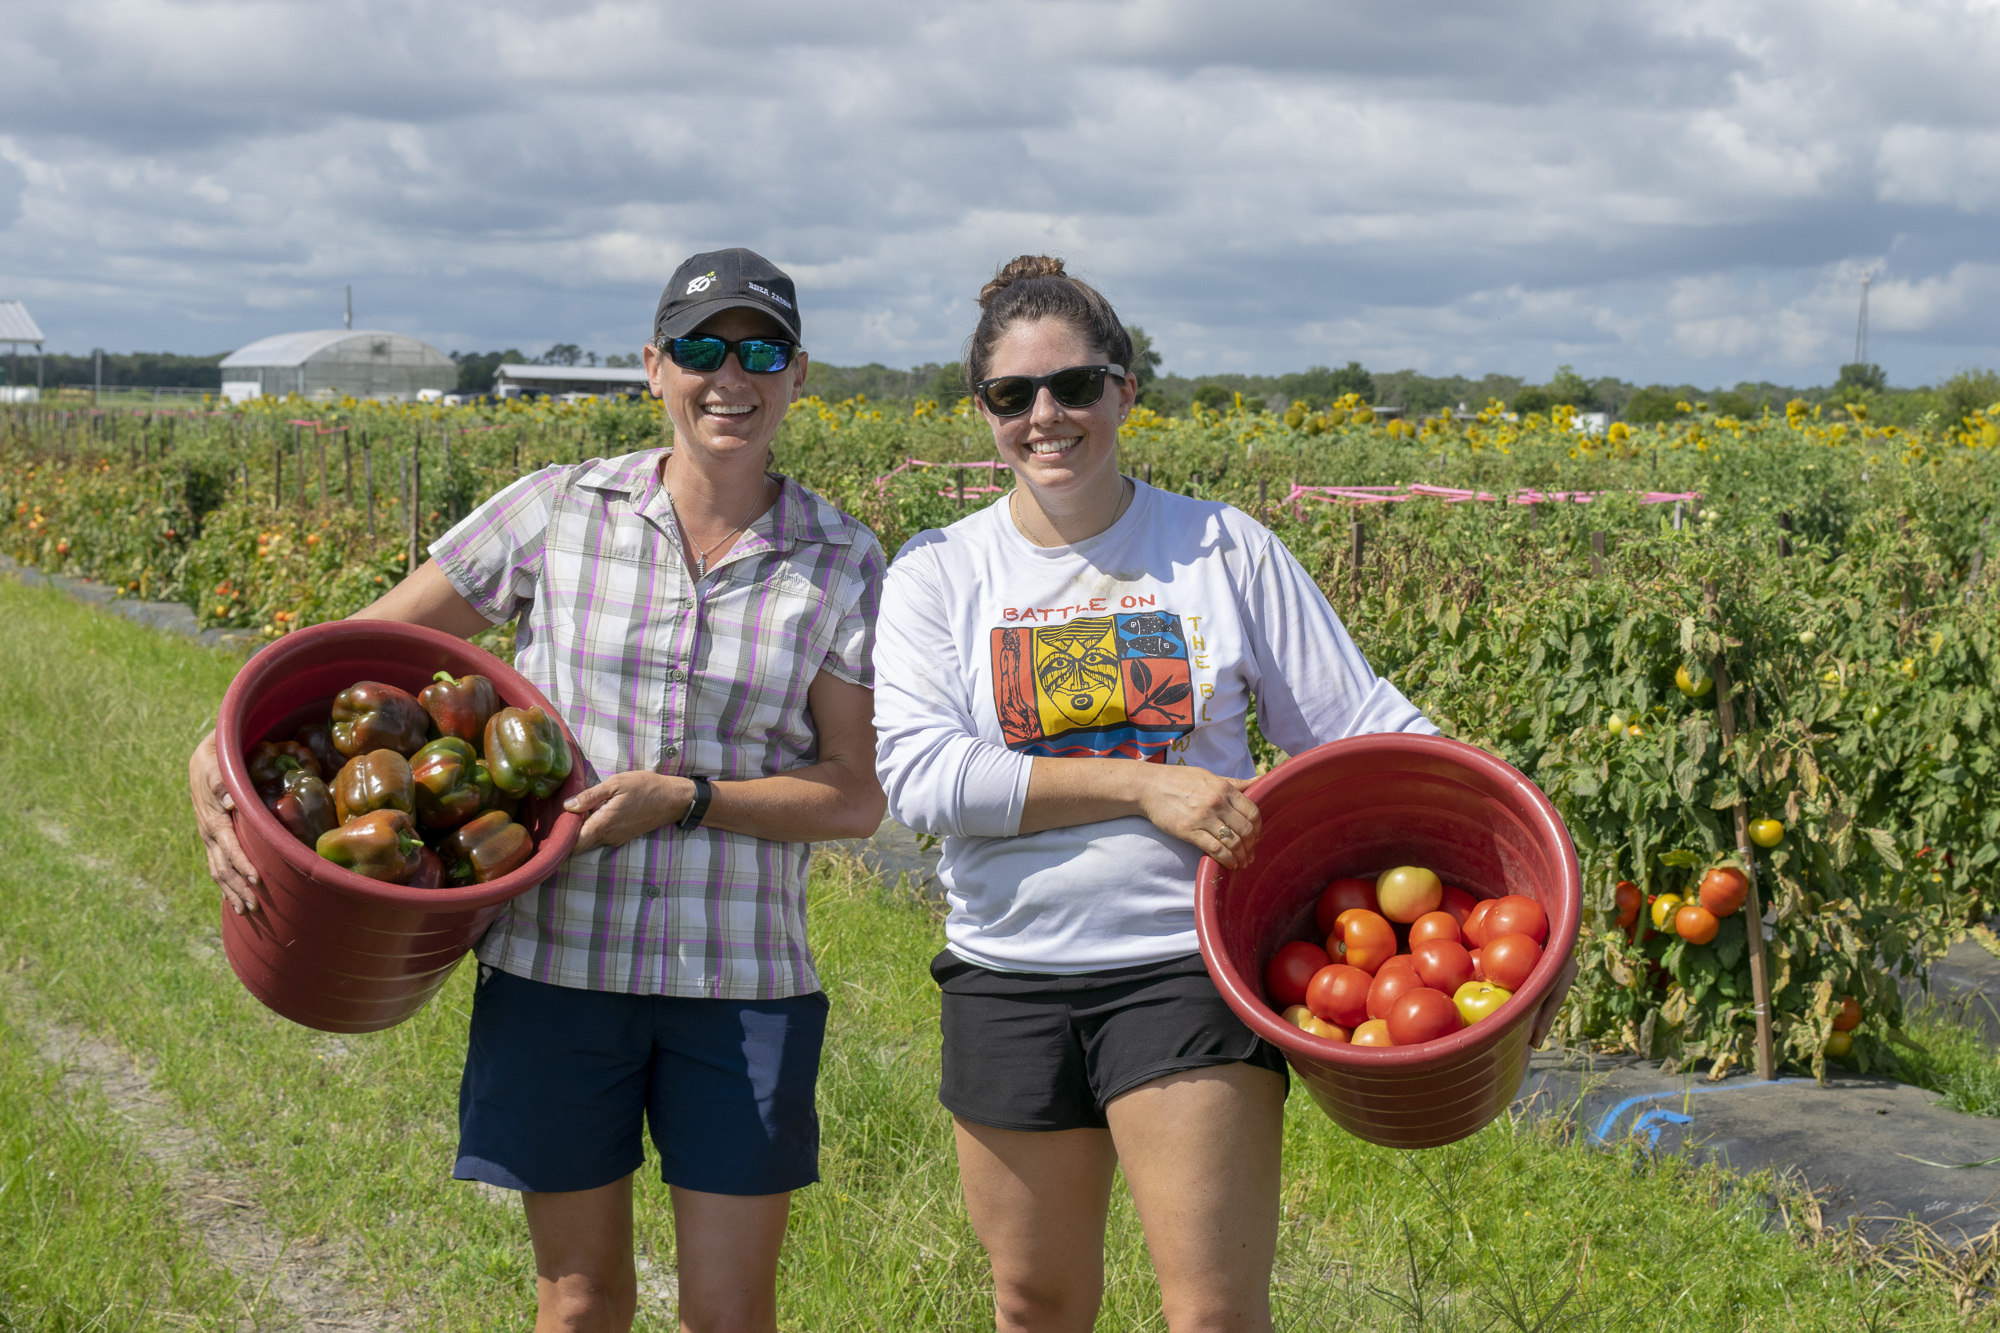 Rebecca Hirshberg, Enza Zaden breeding coordinator, alongside Rebecca Brey, executive director of Transition Sarasota, during gleaning efforts in early June. Produce from the gleaning was donated to The Food Bank of Manatee.